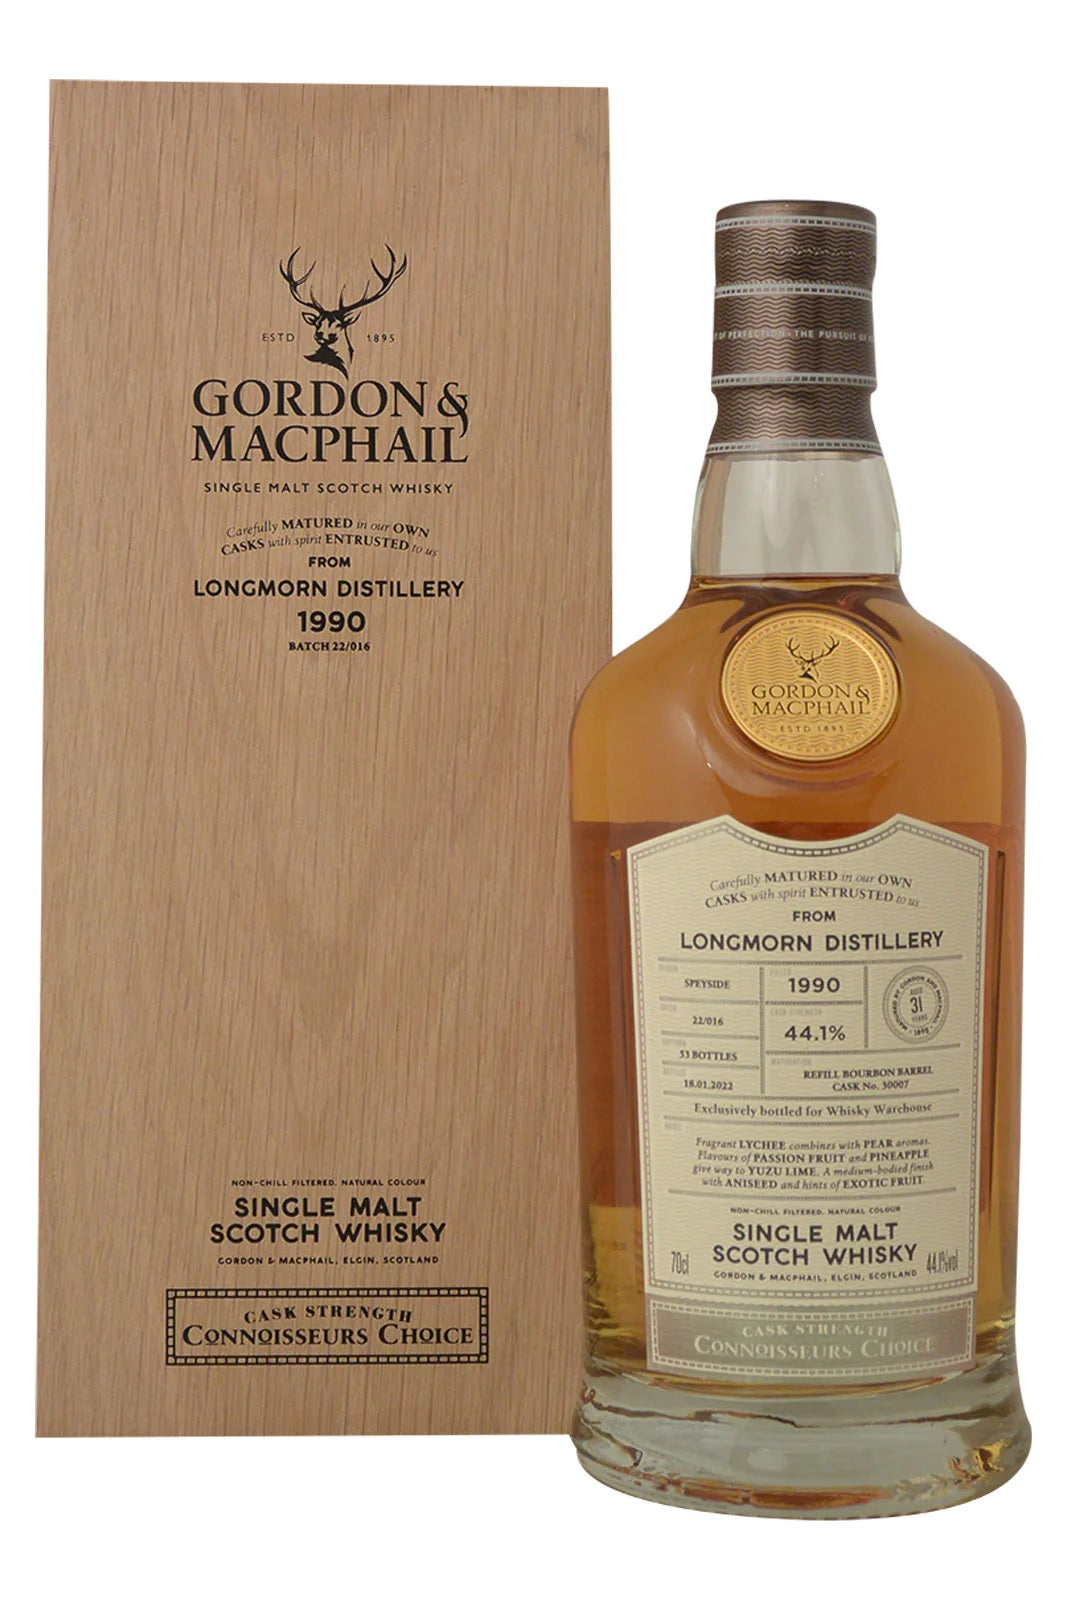 Explore Whisky Excellence with Gordon & MacPhail! 🏴󠁧󠁢󠁳󠁣󠁴󠁿